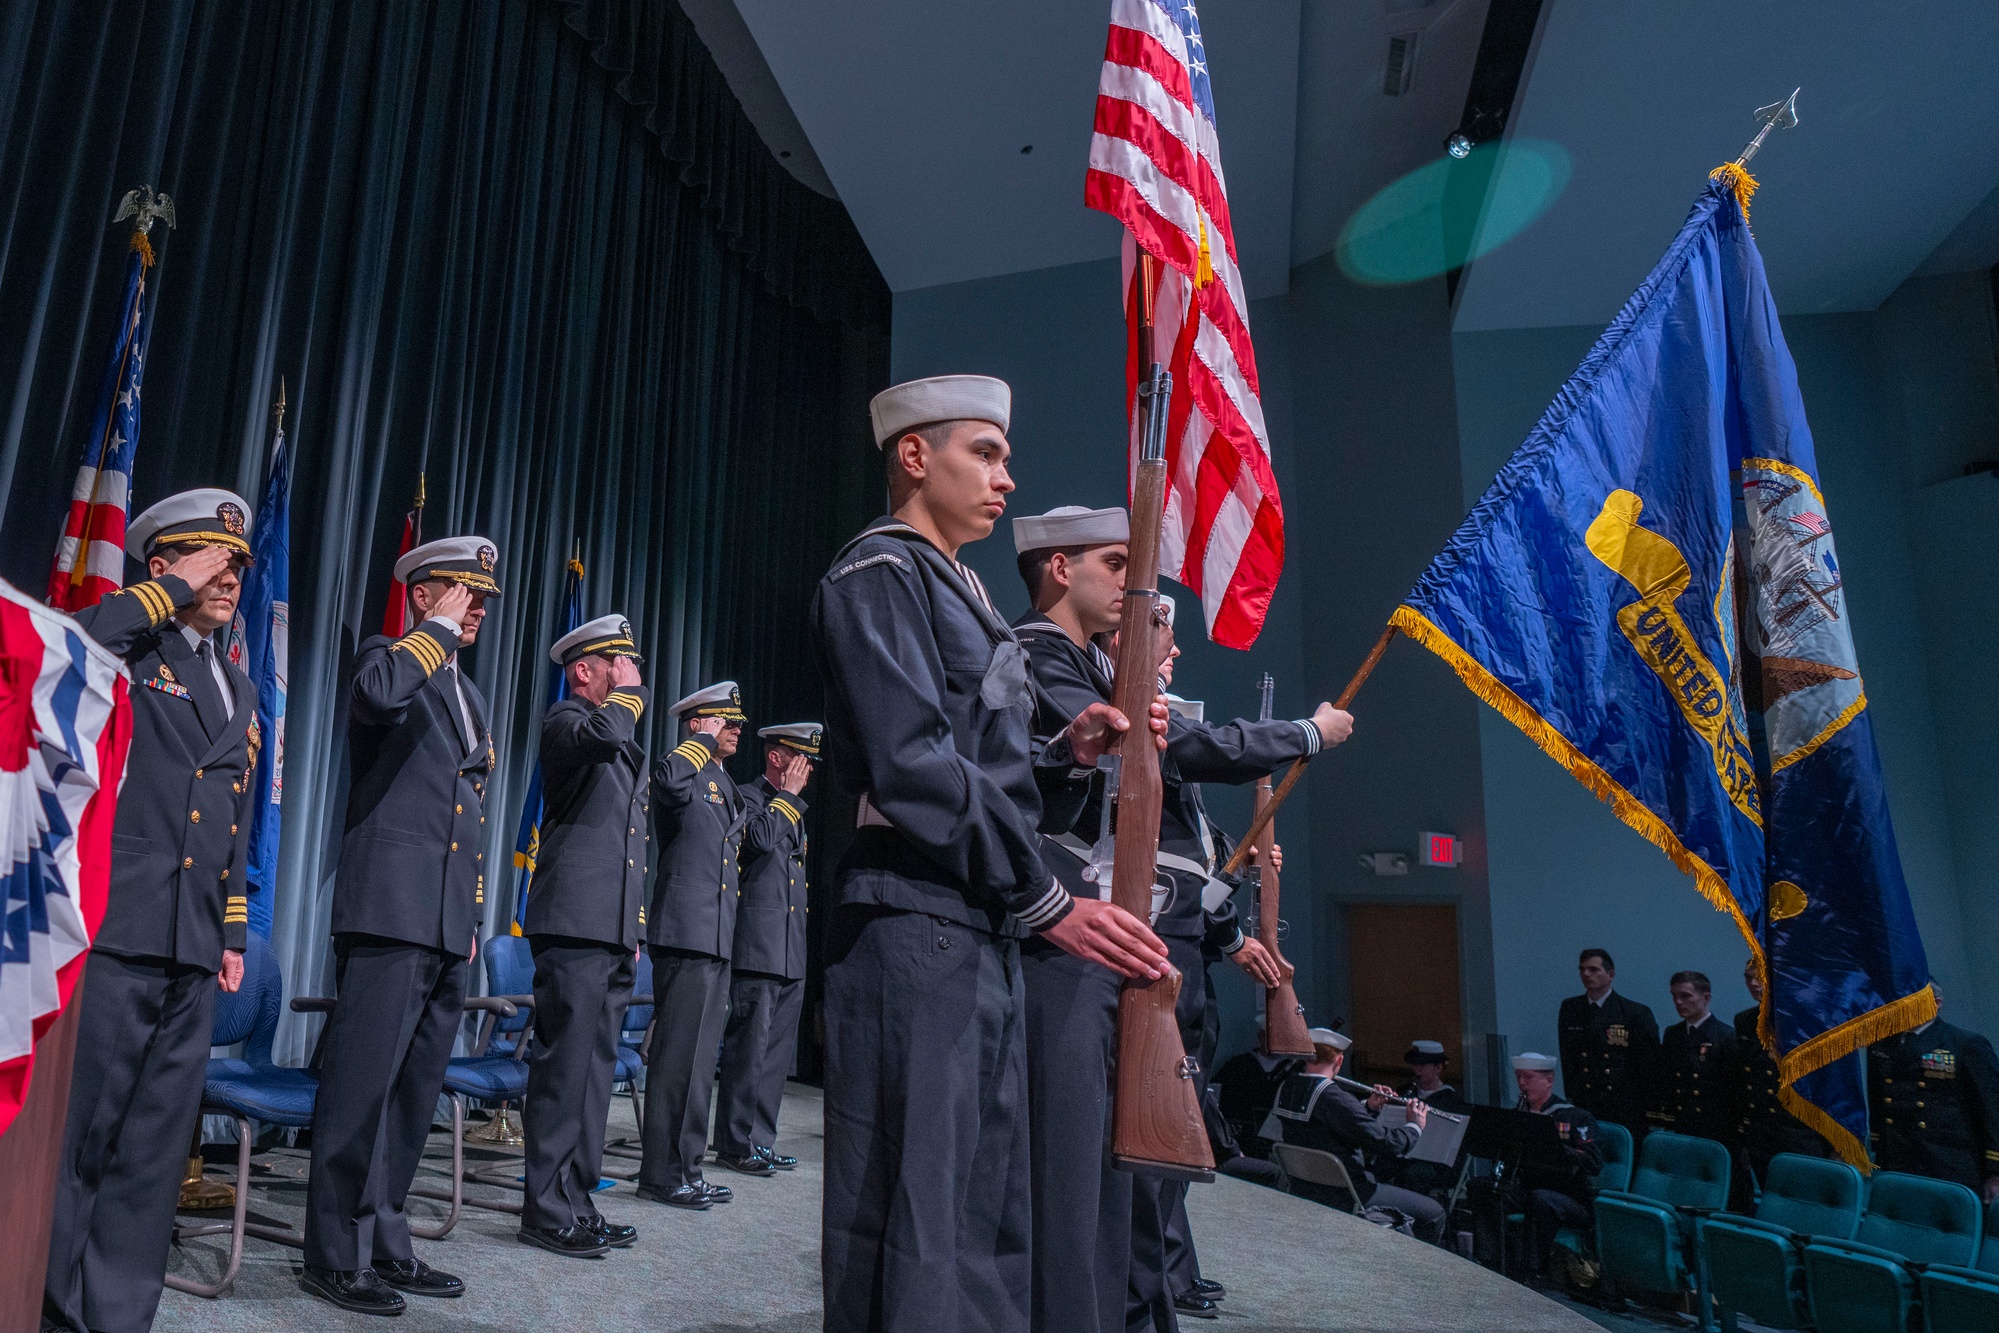 DVIDS - News - Submarine Squadron 4 holds change of command ceremony